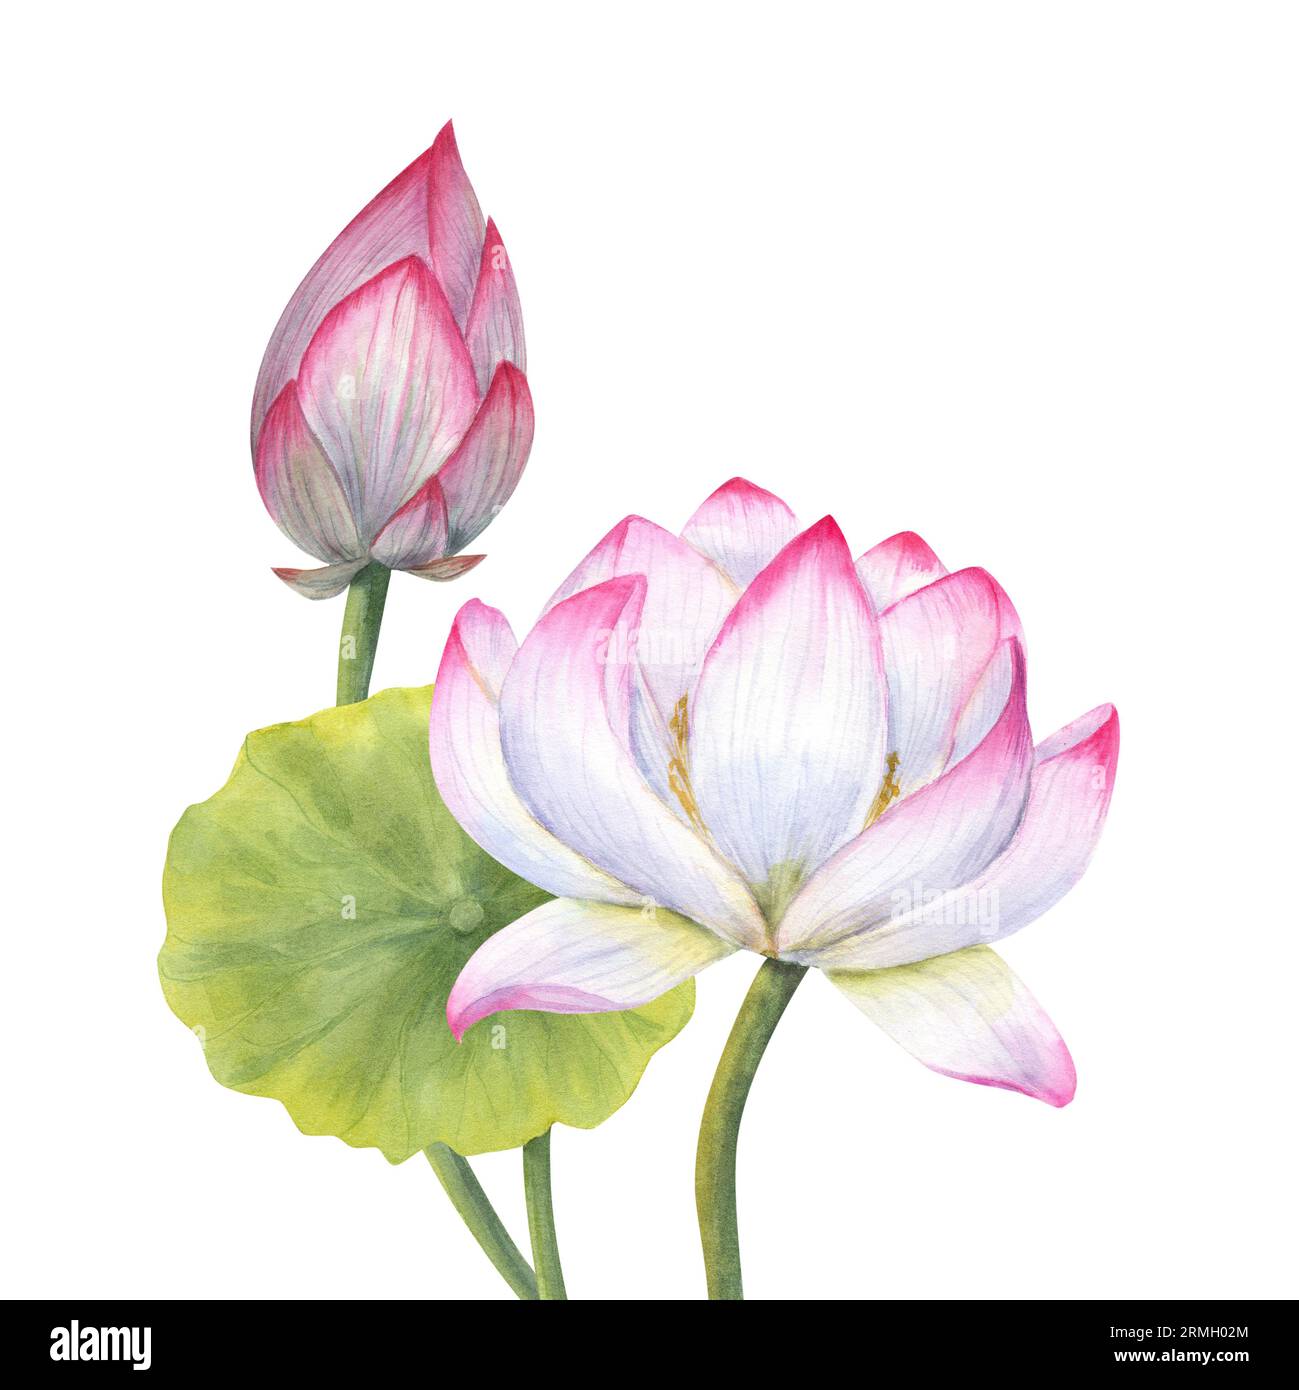 Bouquet with pink Lotus flower, Bud and Leaf. Delicate blooming Water Lily Watercolor illustration isolated on white background. Stock Photo